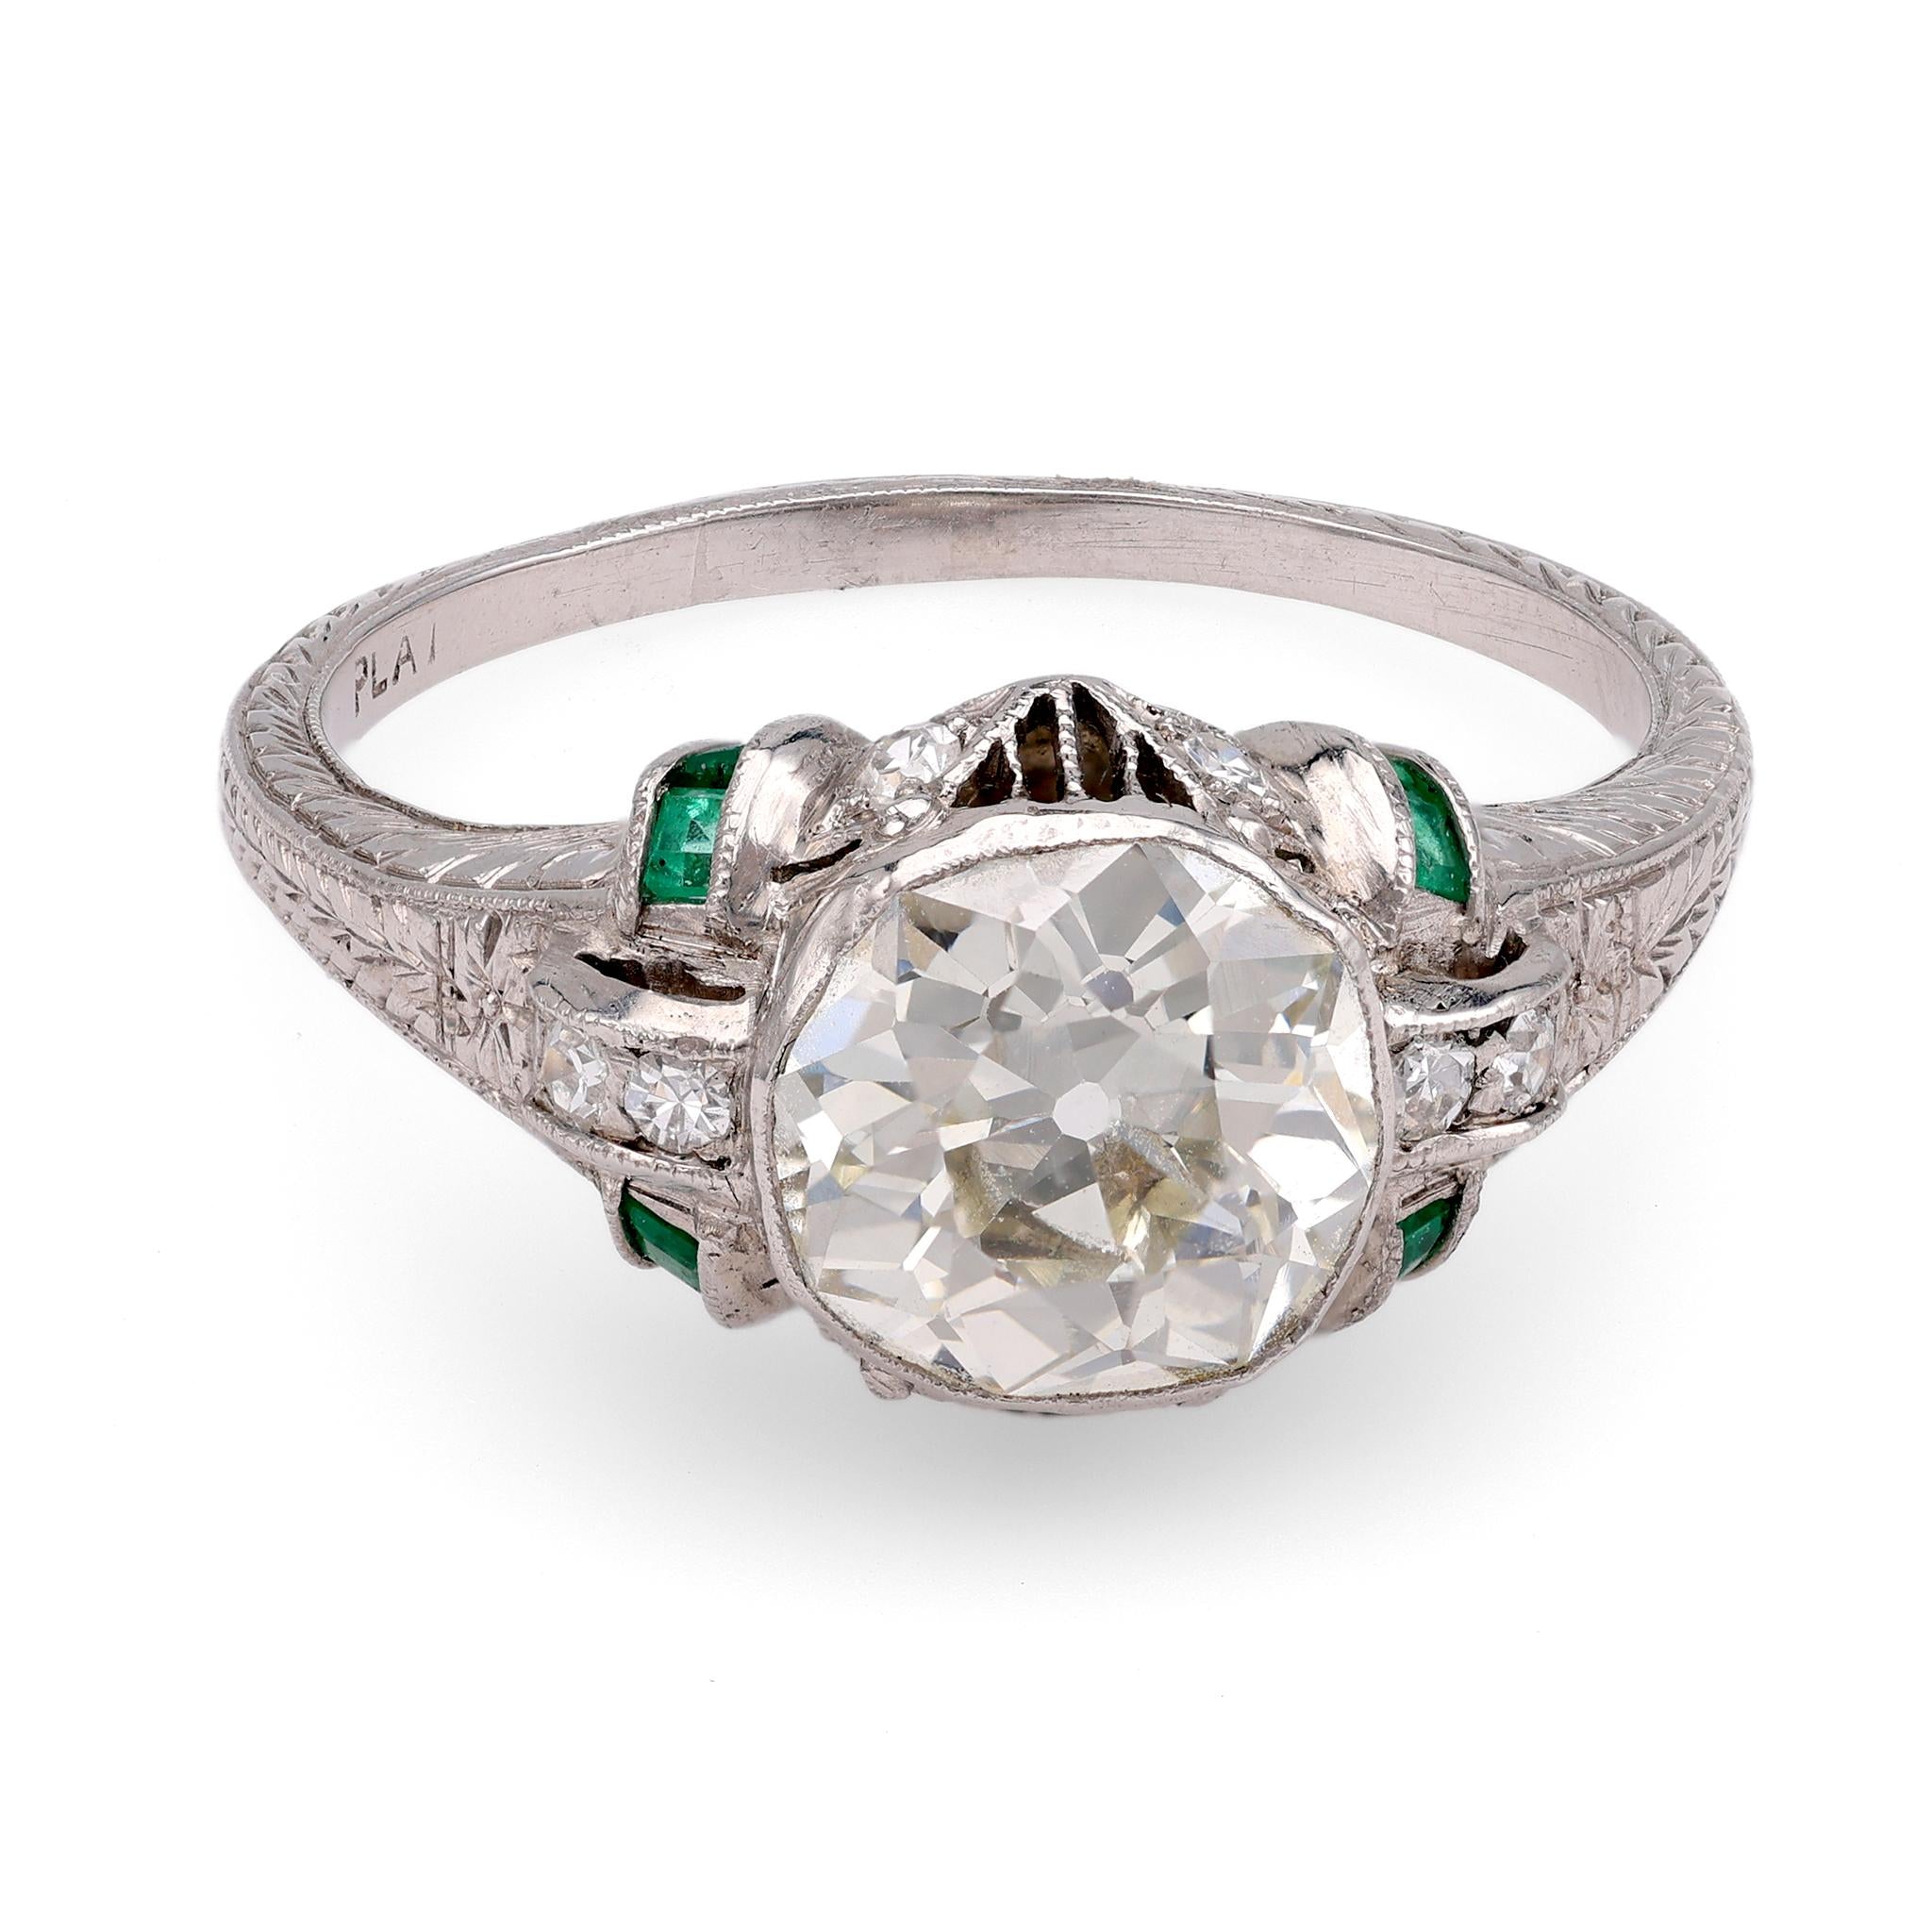 Edwardian Platinum and Emerald Ring  Jack Weir & Sons   